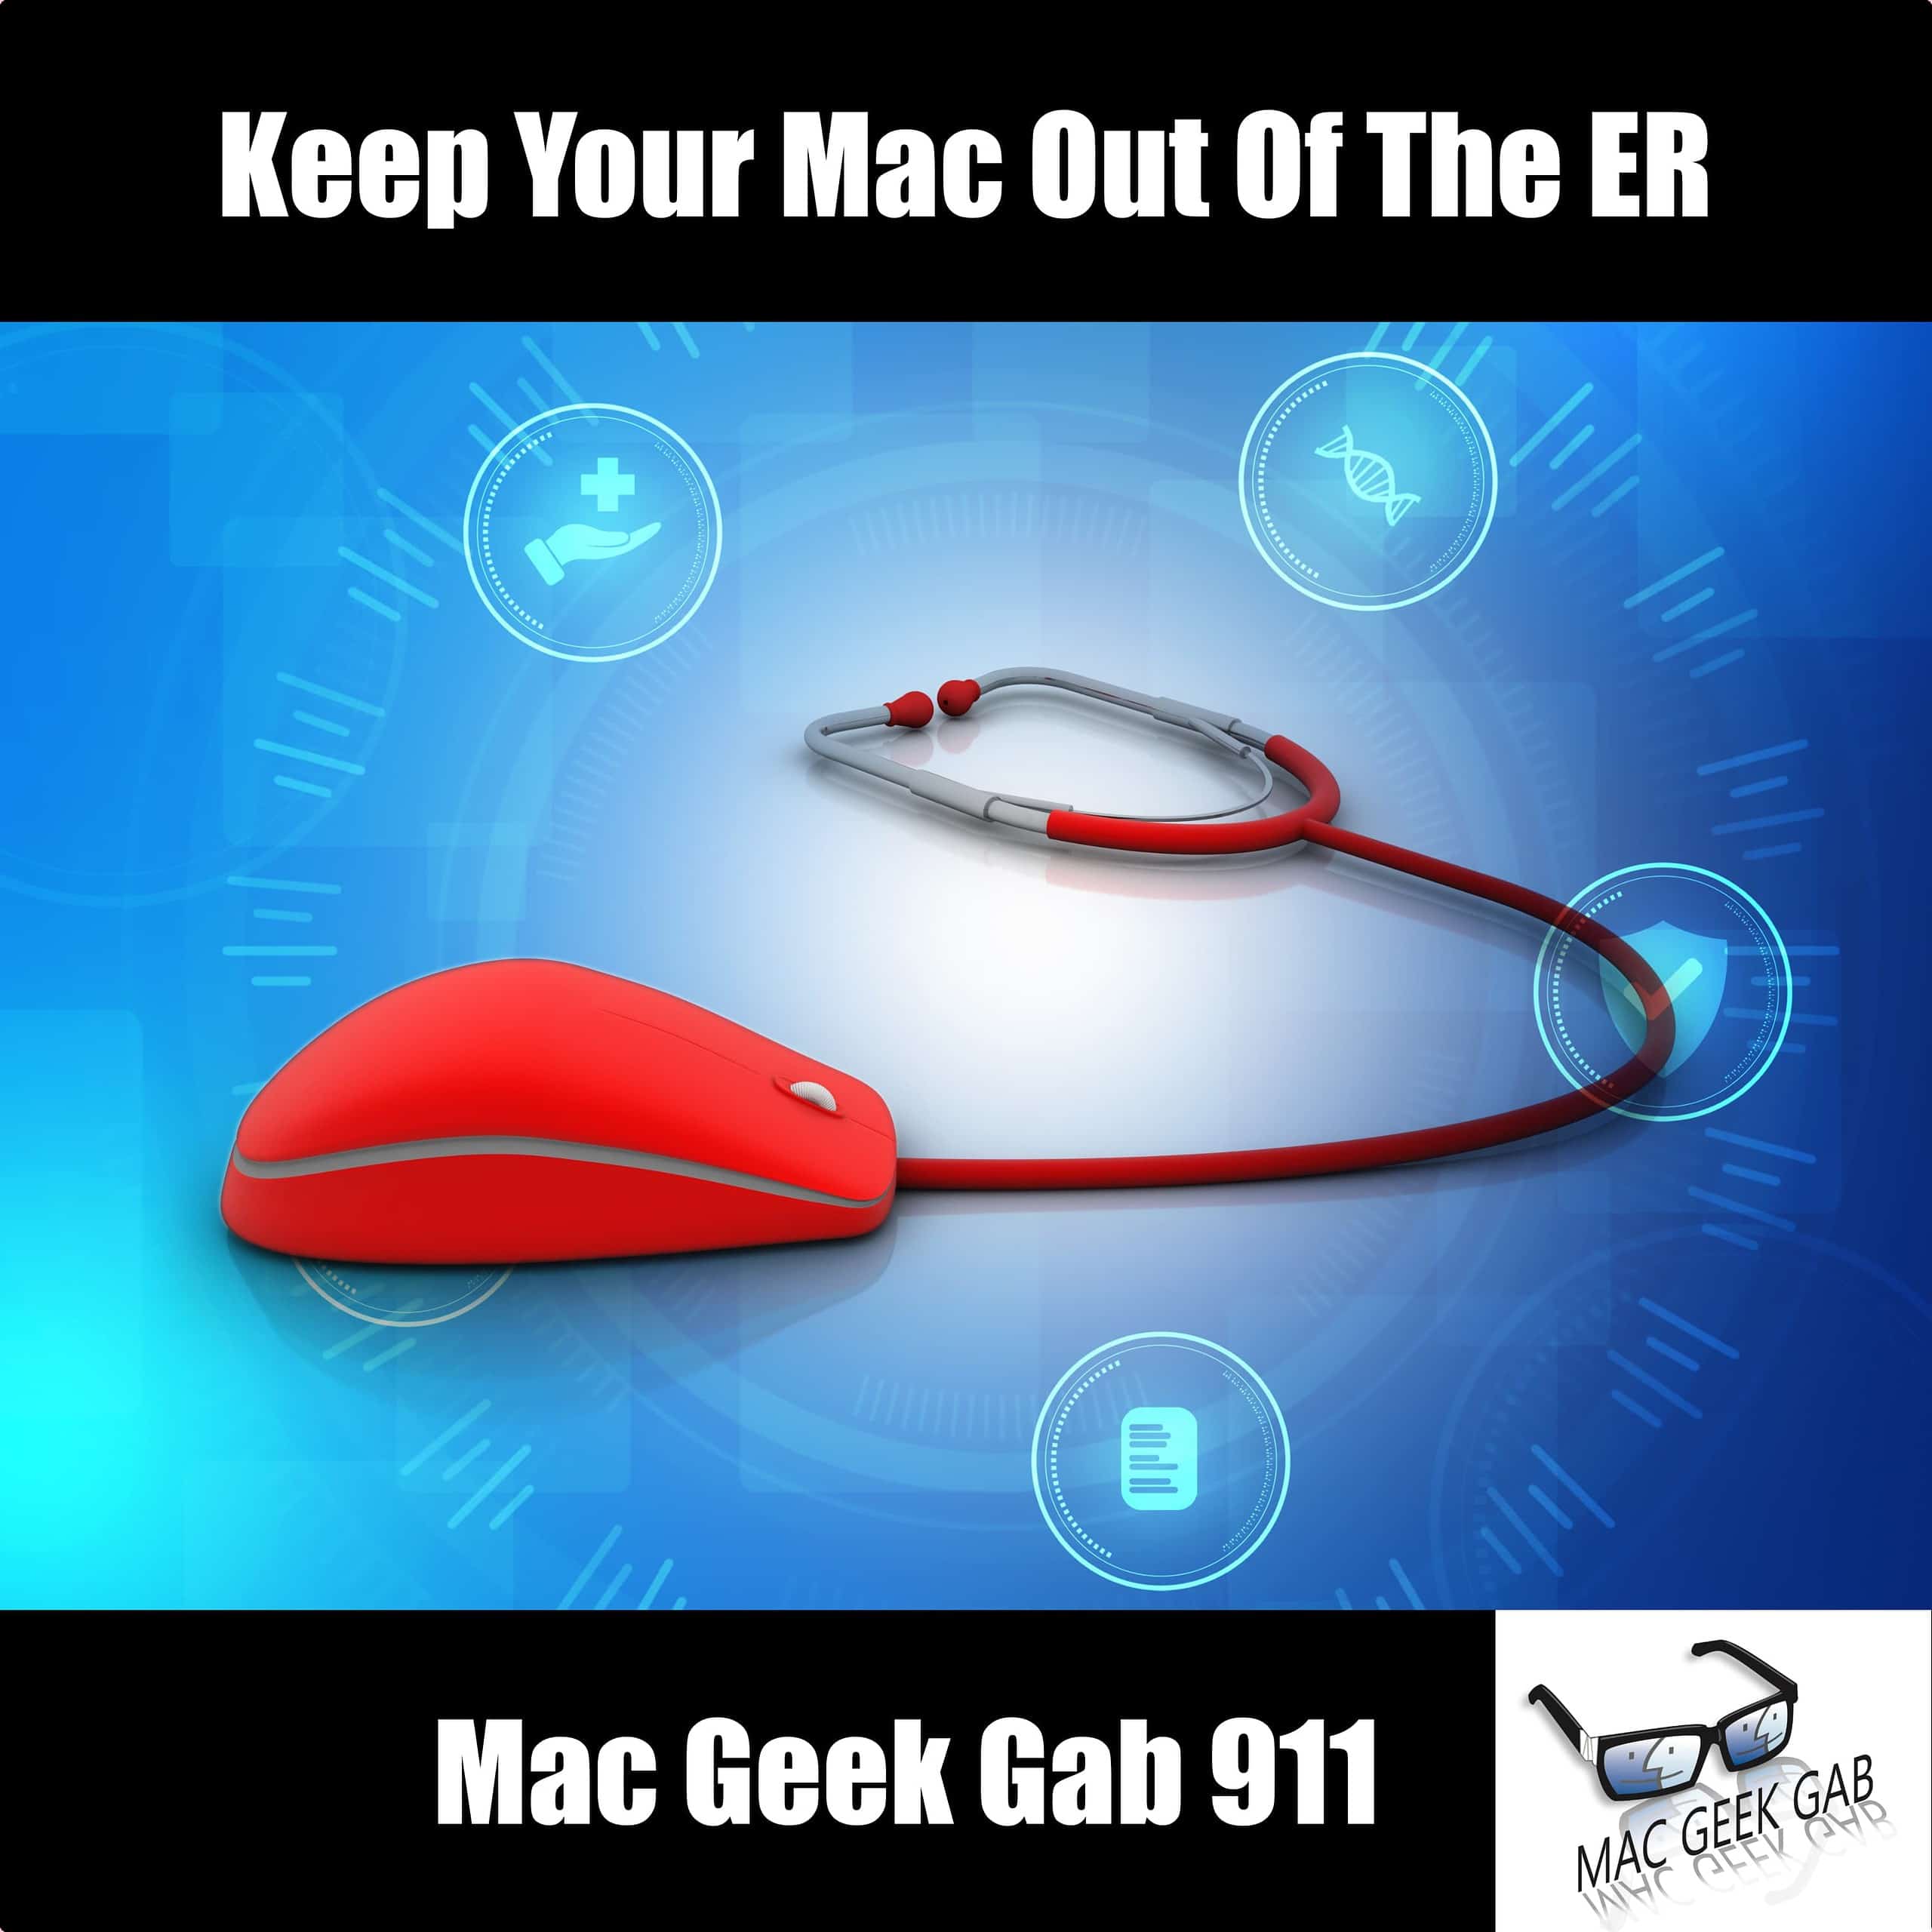 Keep Your Mac Out Of The ER